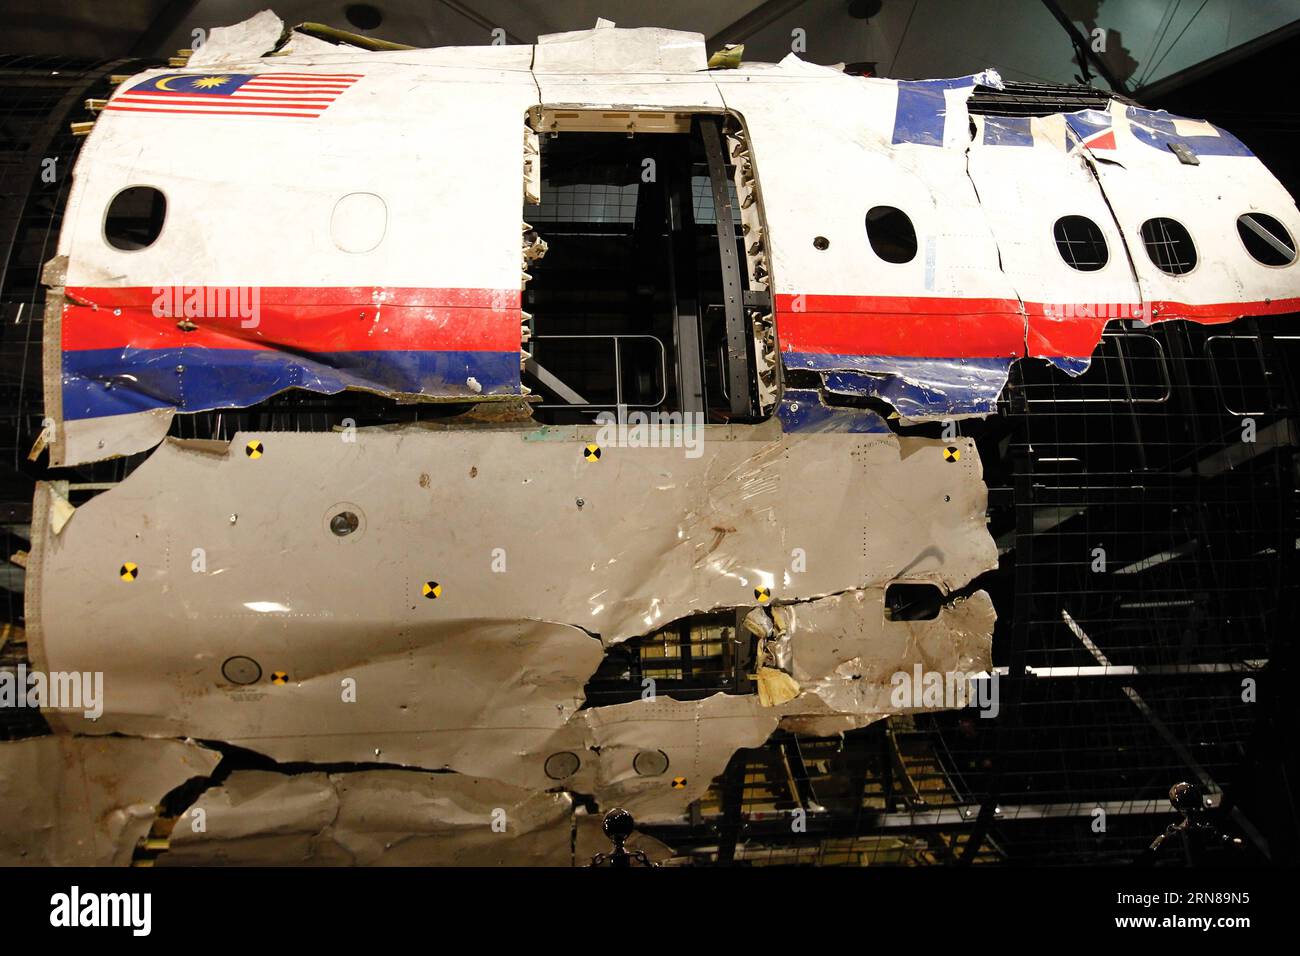 AKTUELLES ZEITGESCHEHEN Flugzeugunglück MH17: Niederländer präsentieren Abschlussbericht 151013 -- GILZE-RIJEN AIR BASE THE NETHERLANDS, Oct. 13, 2015 -- Wreckage of flight MH17 is seen after the presentation of the investigation report on the cause of its crash, at the Gilze-Rijen air base, the Netherlands, on Oct. 13, 2015. The crash of flight MH17 on 17 July last year was caused by the detonation of a 9N314M-type warhead launched from eastern Ukraine using a Buk missile system, said the investigation report published Tuesday by the Dutch Safety Board DSB.  NETHERLANDS-MH17-REPORT SylviaxLed Stock Photo